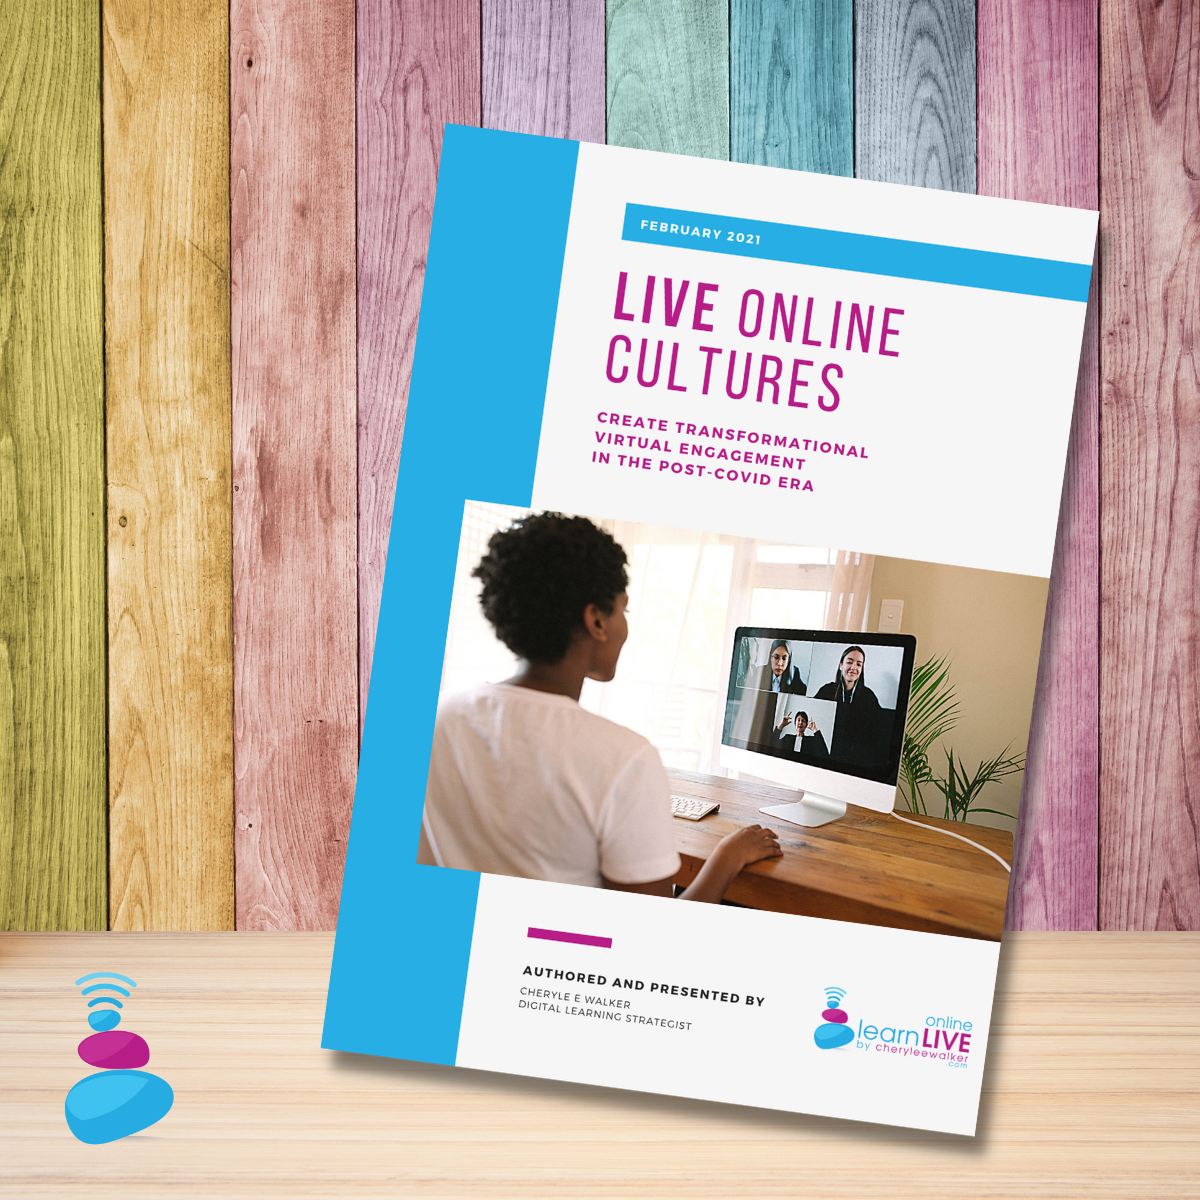 LIVE Online Cultures – how to create transformational virtual engagement in the post-COVID era